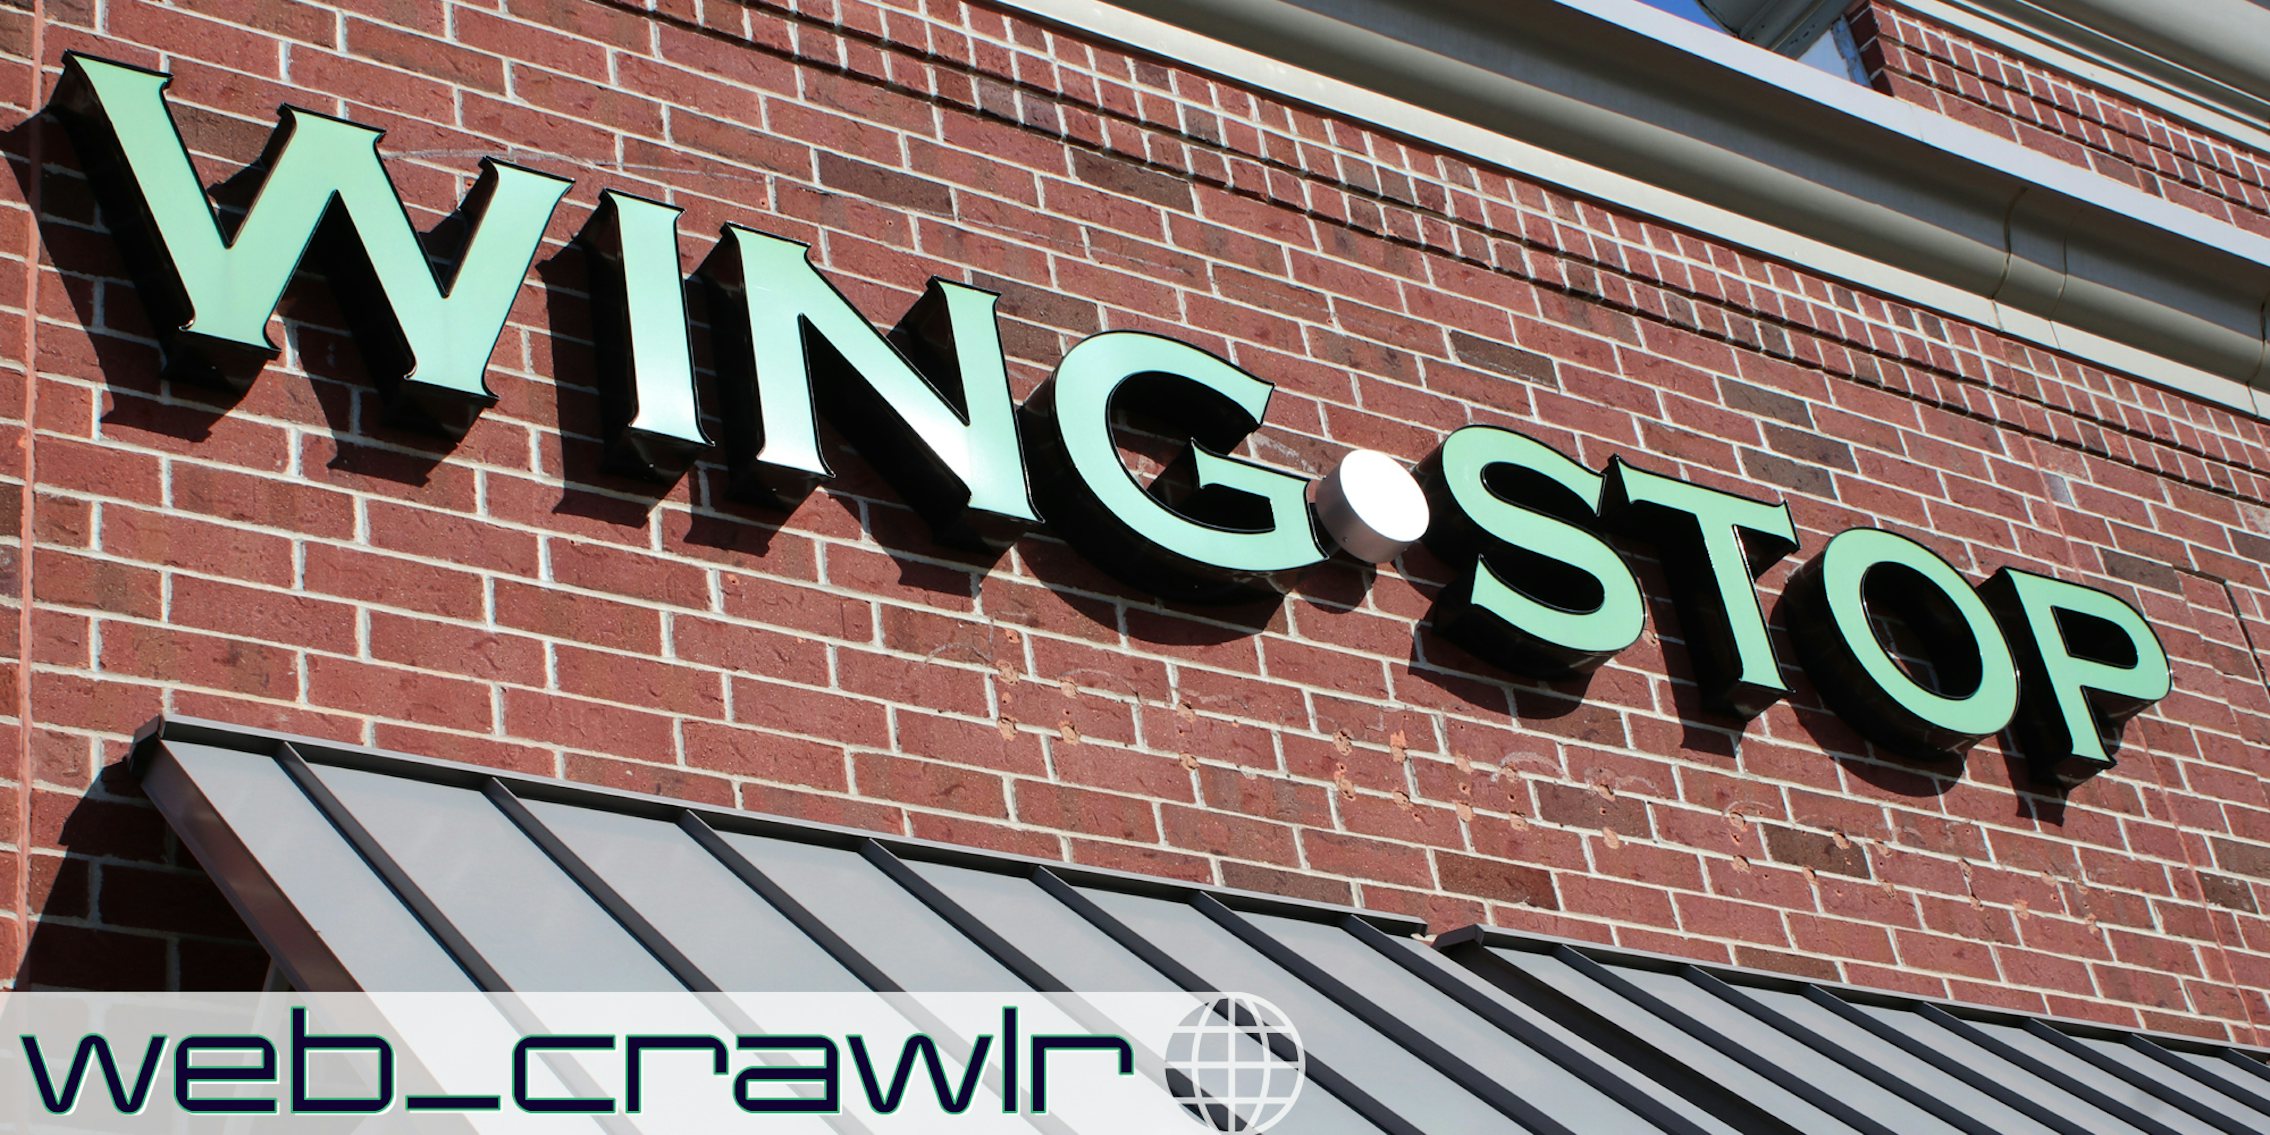 A Wing Stop sign. The Daily Dot newsletter web_crawlr logo is in the bottom left corner.